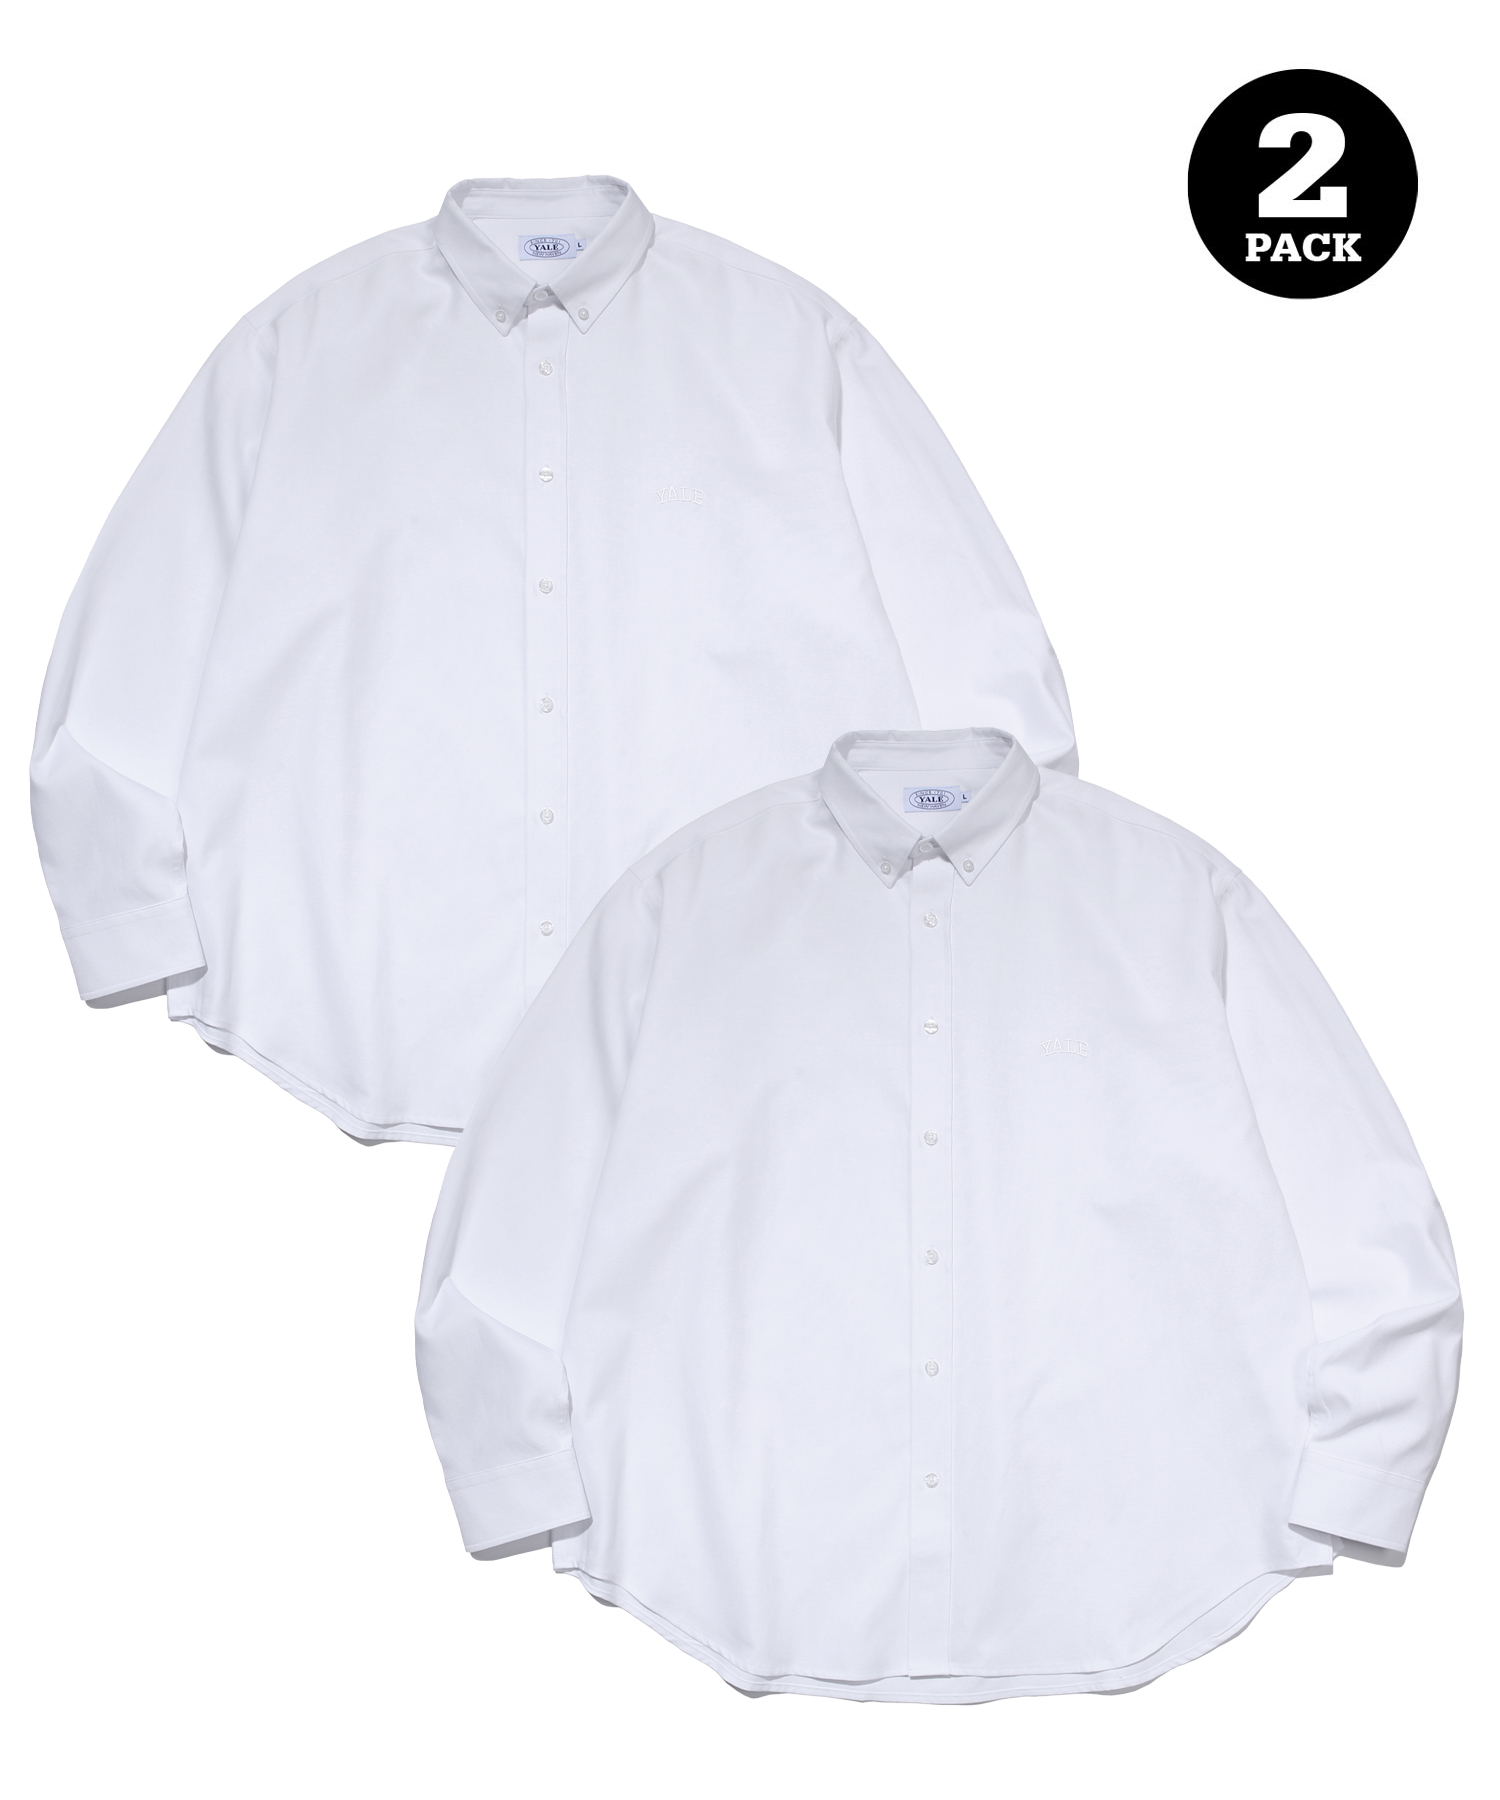 (24SS) [ONEMILE WEAR] 2PACK OXFORD BIG SHIRT WHITE / WHITE